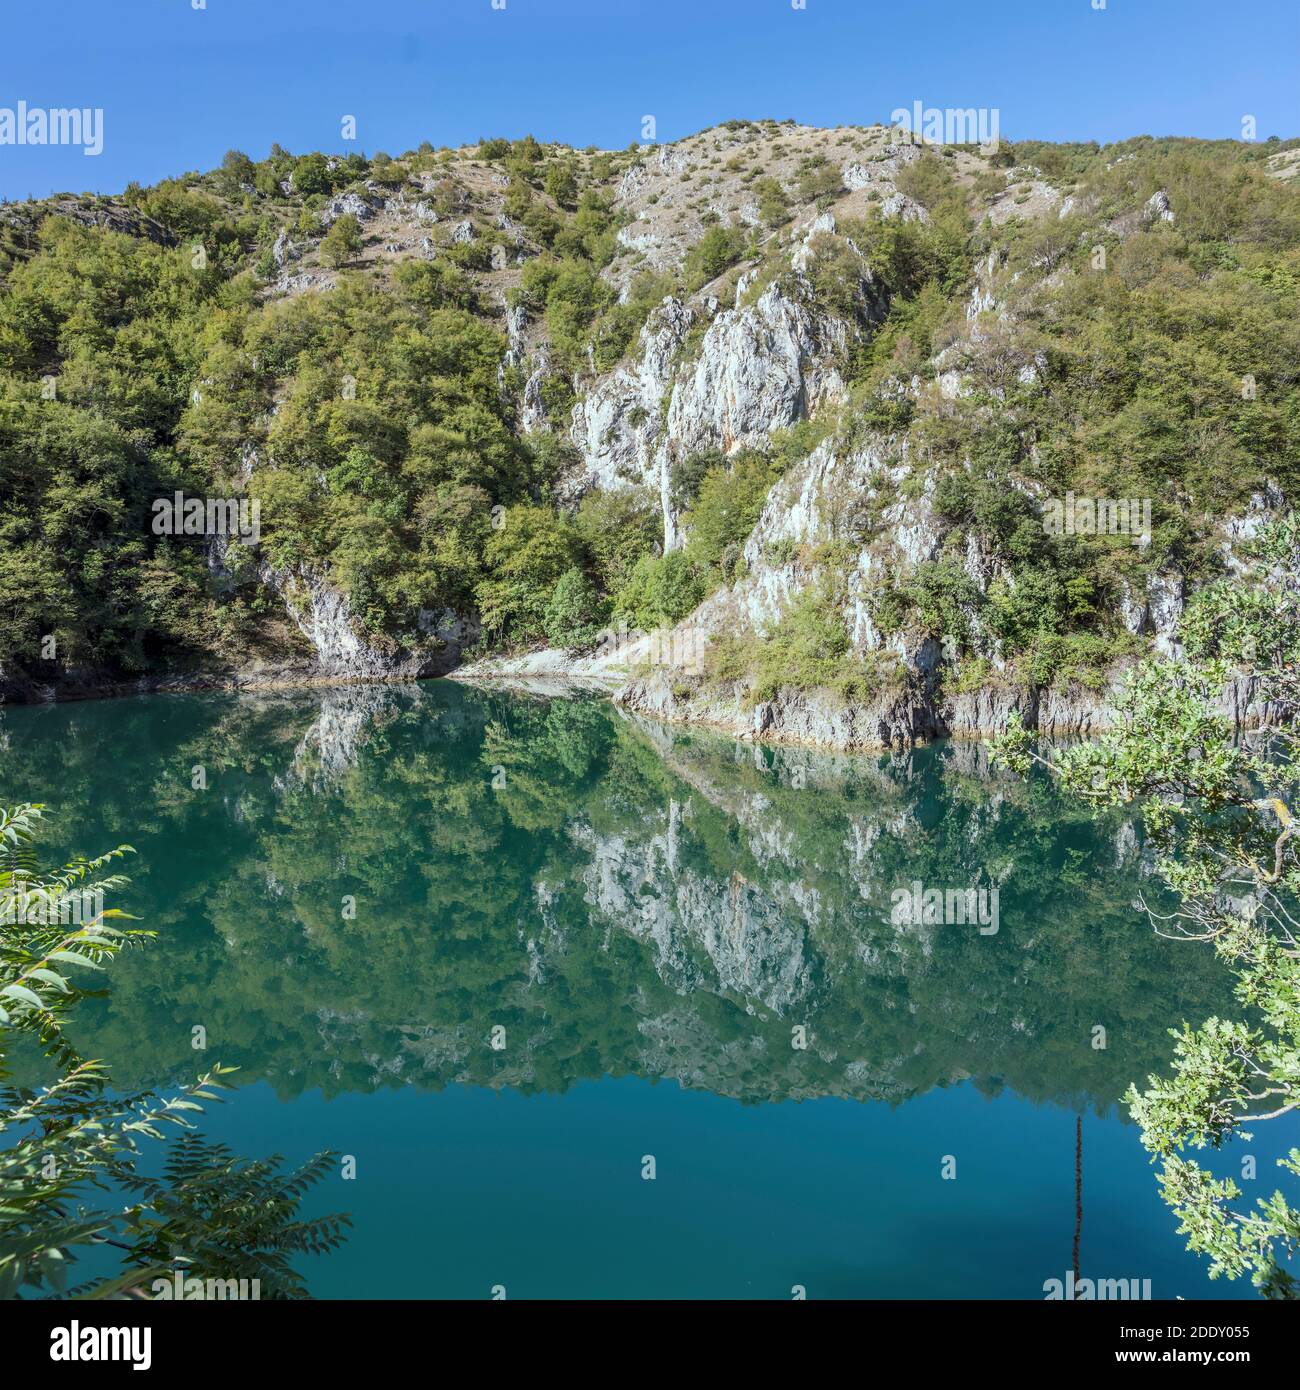 landscape with  harsh rocky slopes of Sagittario river gorge reflecting in blue water, shot in bright light near S.Domenico, L'Aquila, Abruzzo, Italy Stock Photo